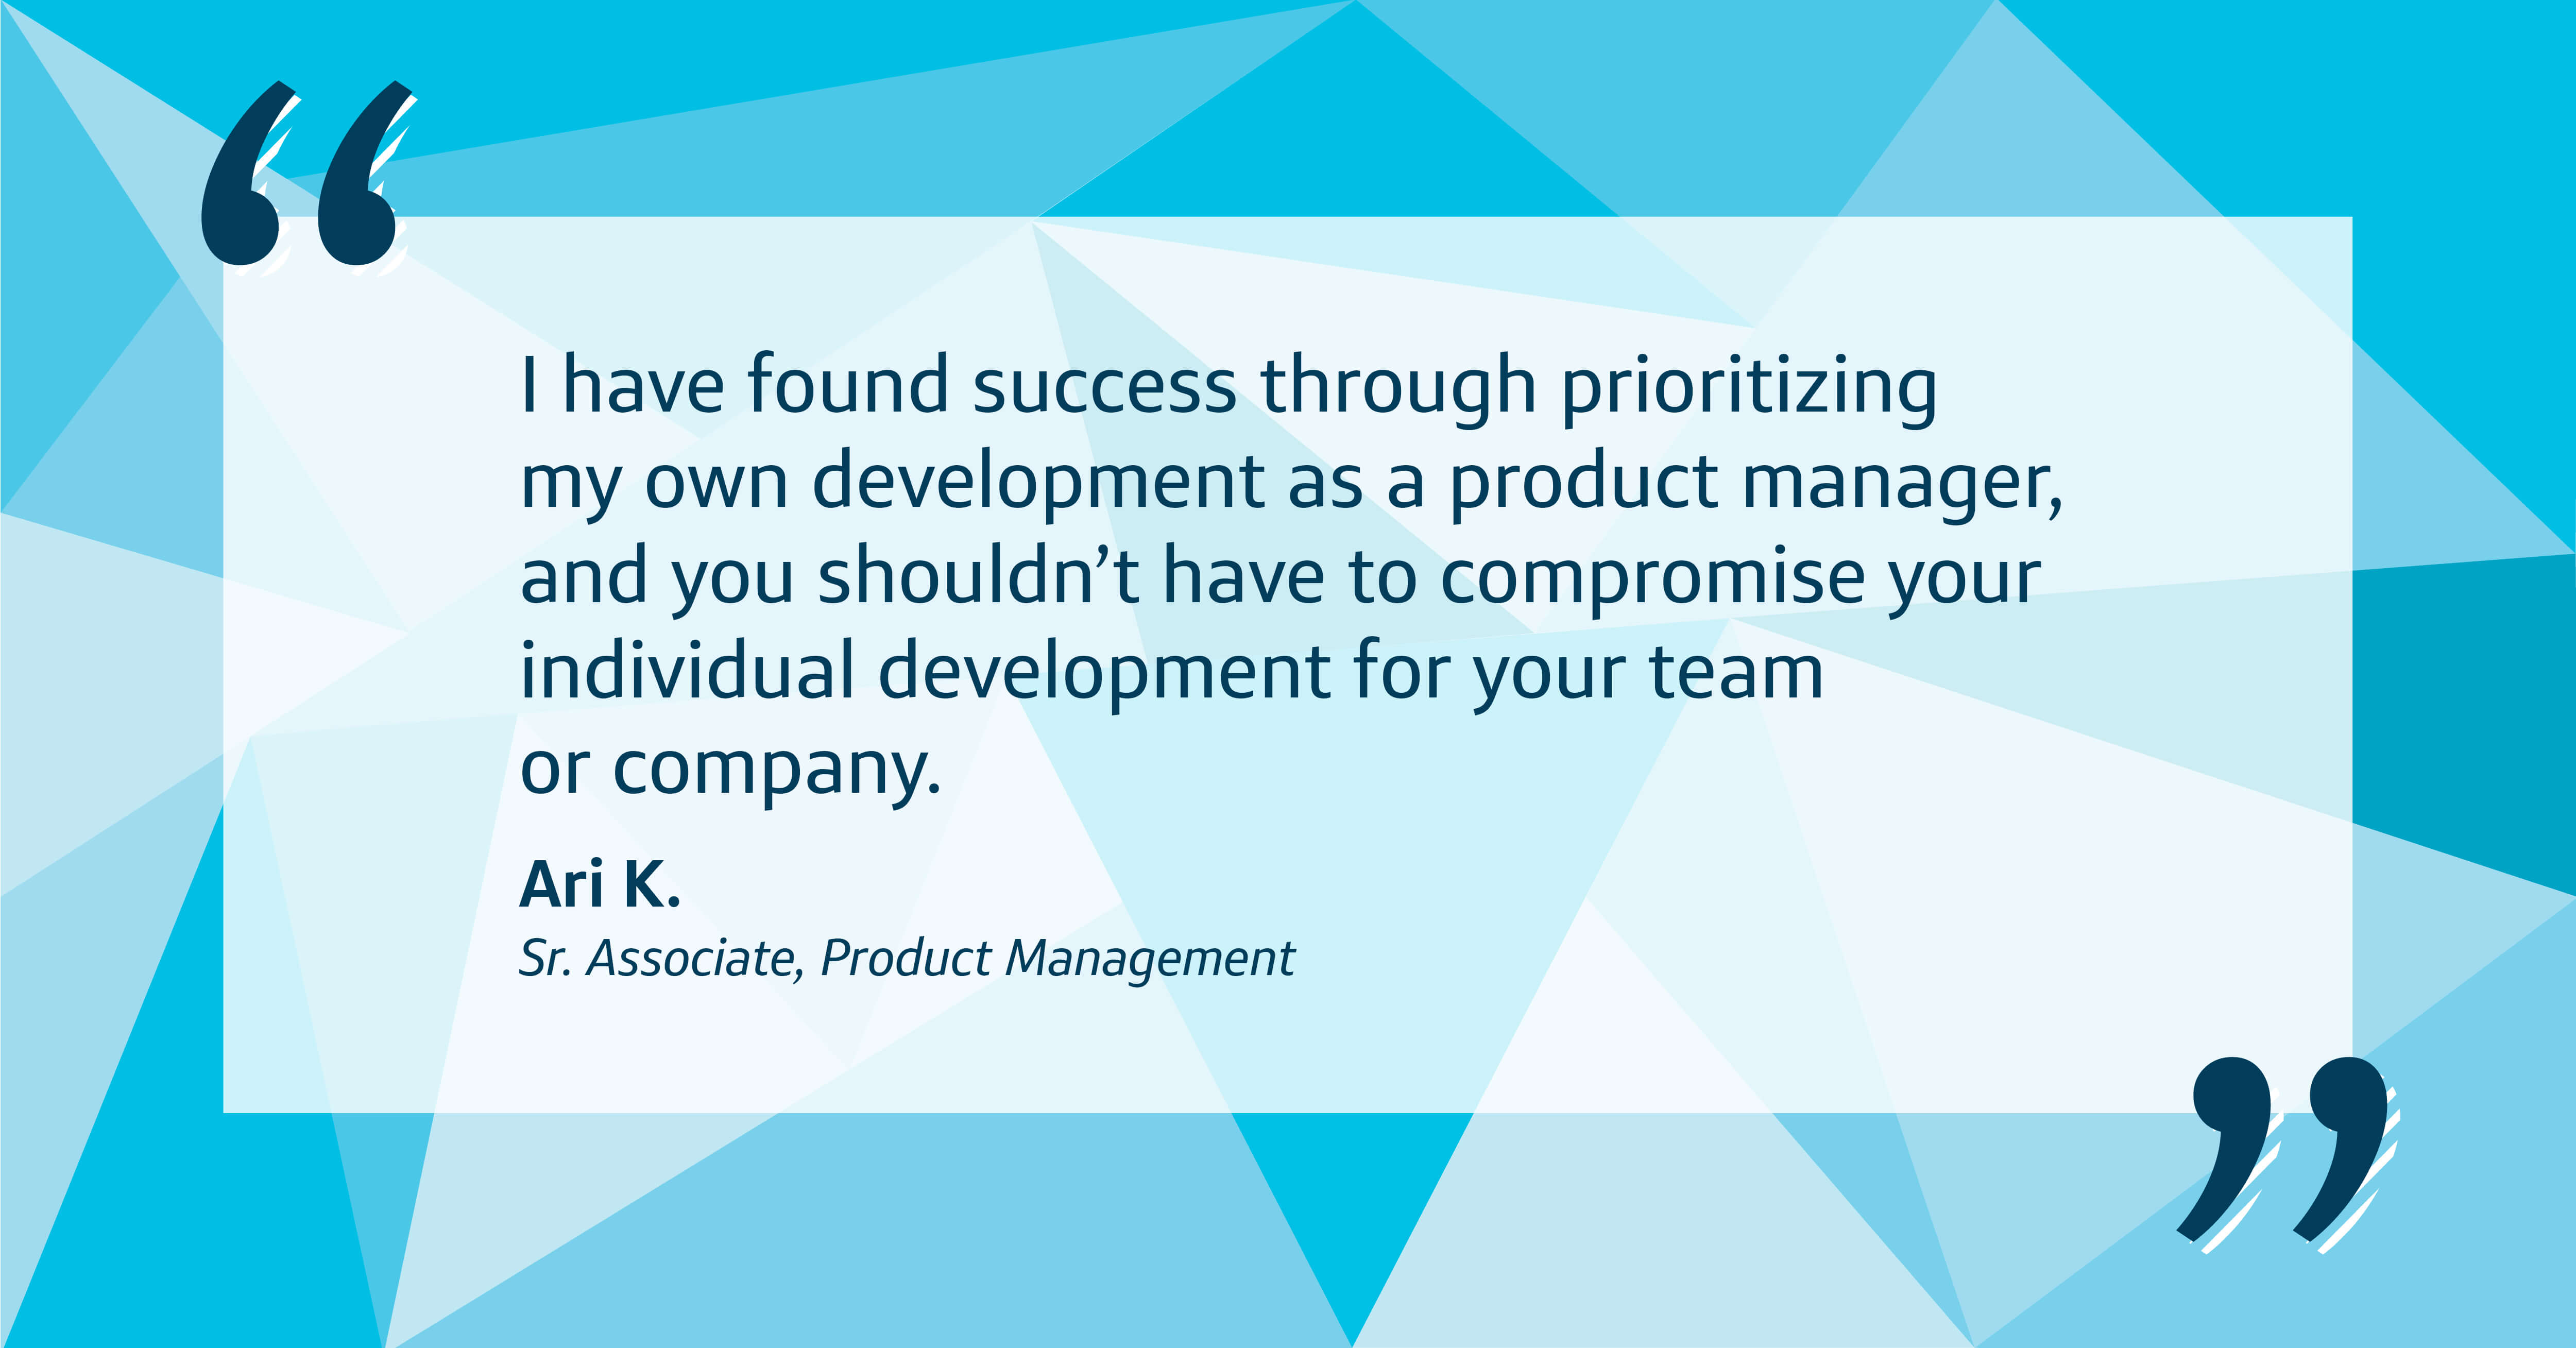 Quote image with blue patterned background that says, "I have found success through prioritizing my own development as a product manager, and you shouldn’t have to compromise your individual development for your team or company." - Ari K., Capital One Senior Associate, Product Management 